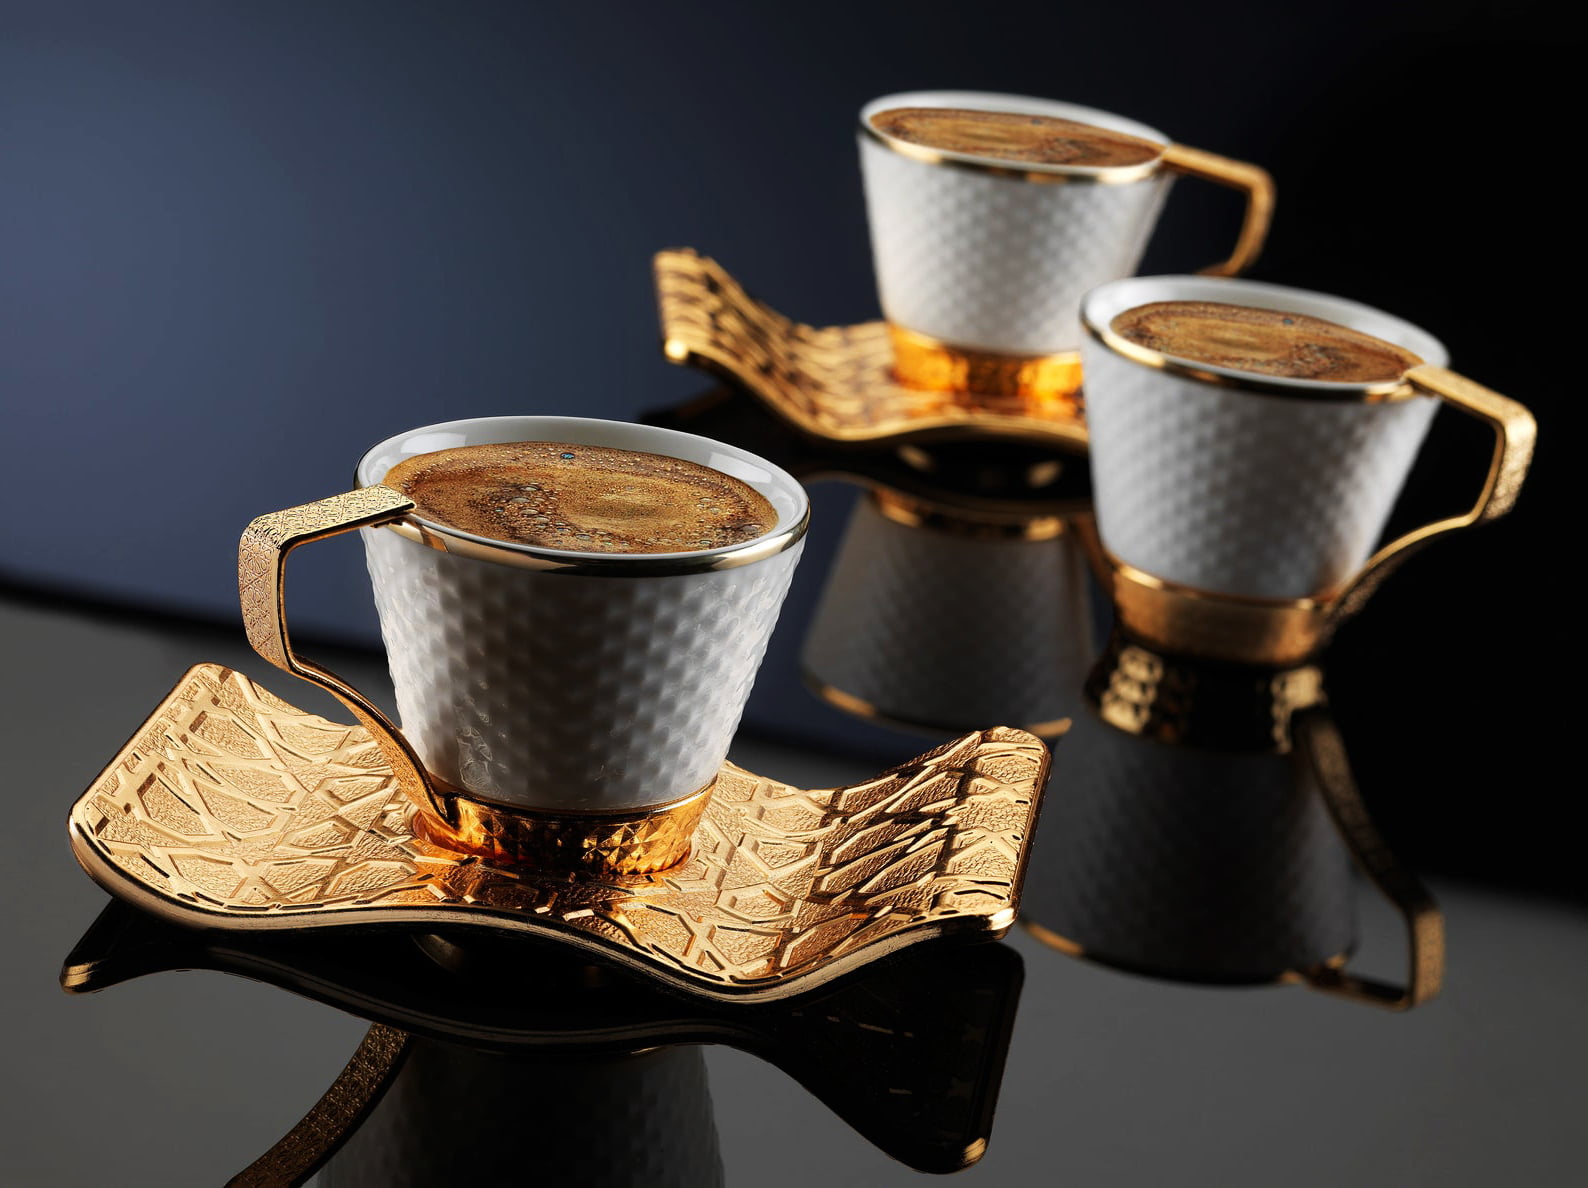 https://traditionalturk.com/wp-content/uploads/2021/05/luxury-gold-color-turkish-coffee-cup-set-for-six-person.jpg